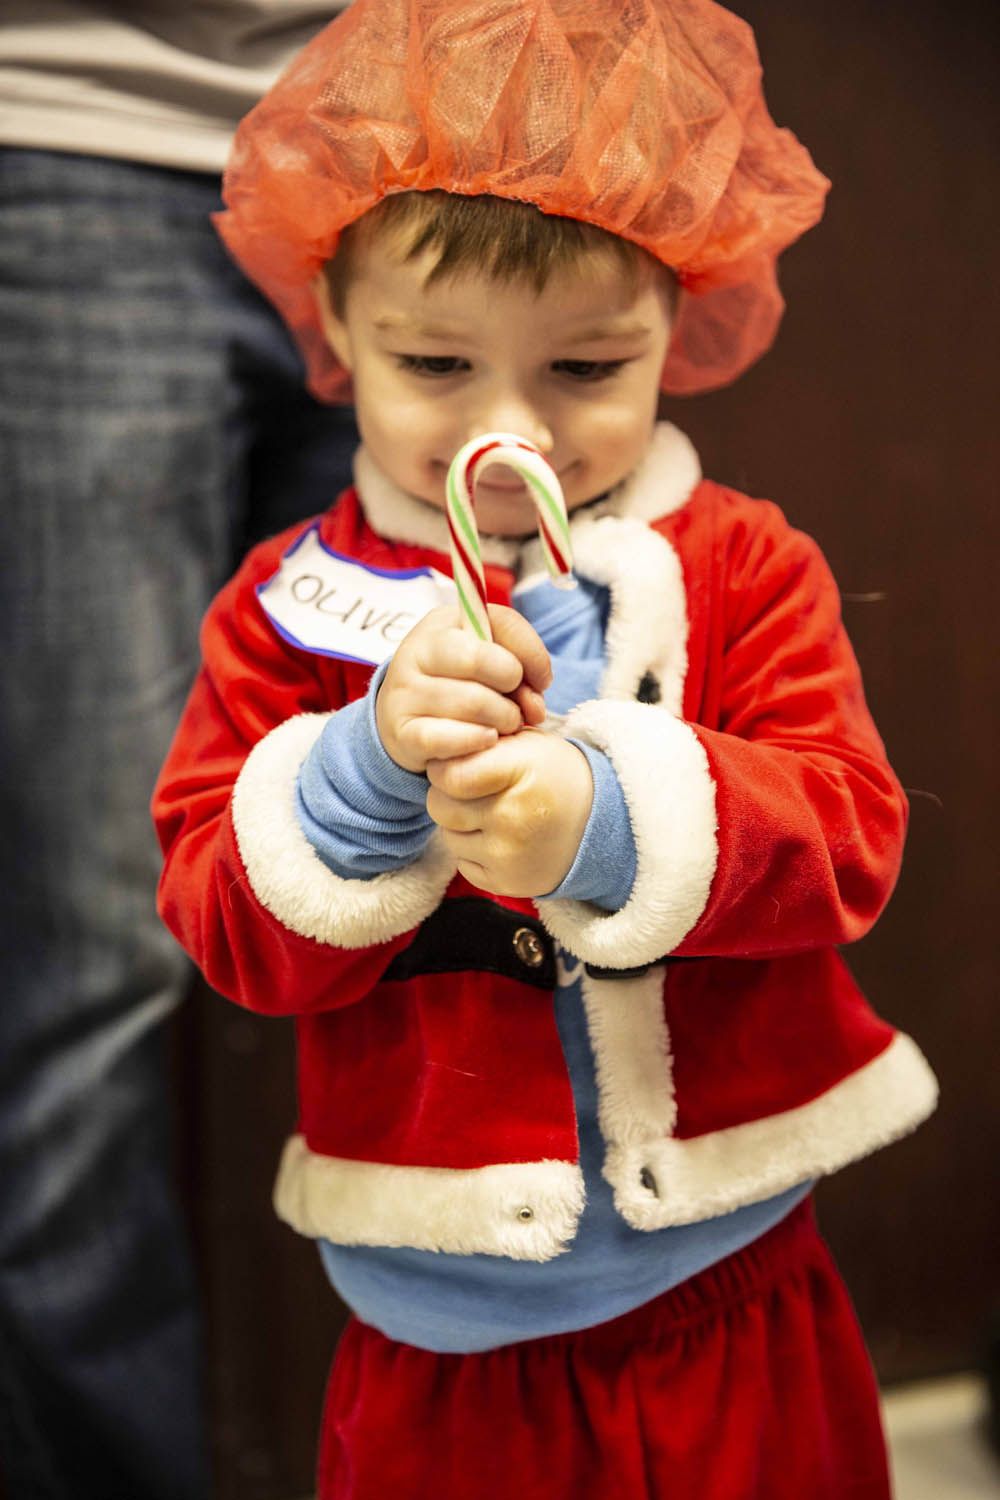 Lifeline Christmas Event - Boy with Candy Cane